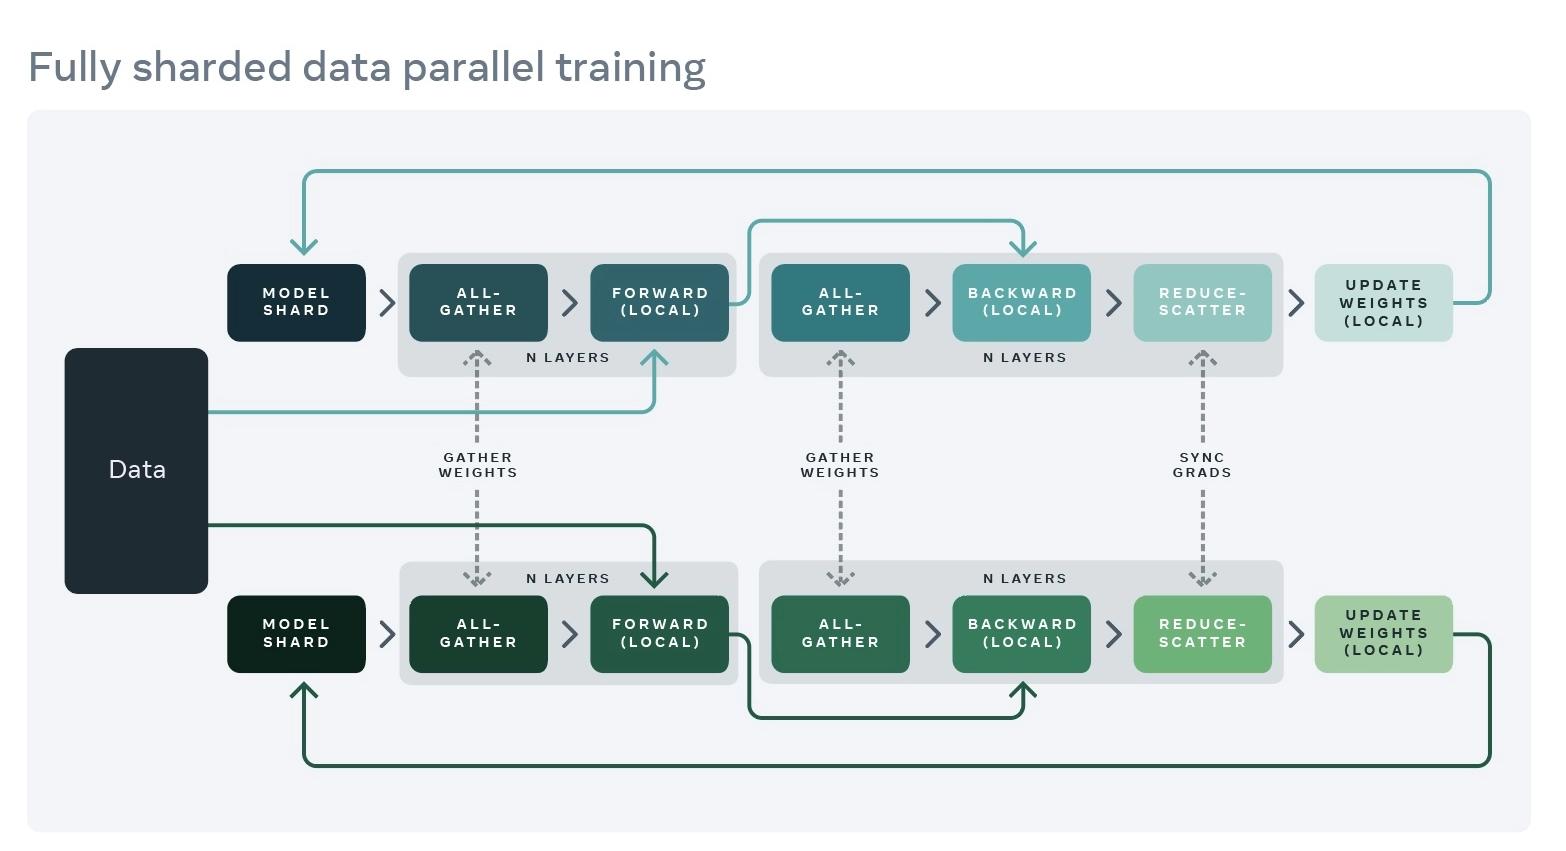 Fully Sharded Data Parallelism (FSDP) in distributed training in FULL_SHARD mode. Picture taken from the facebook engineering blog post on FSDP